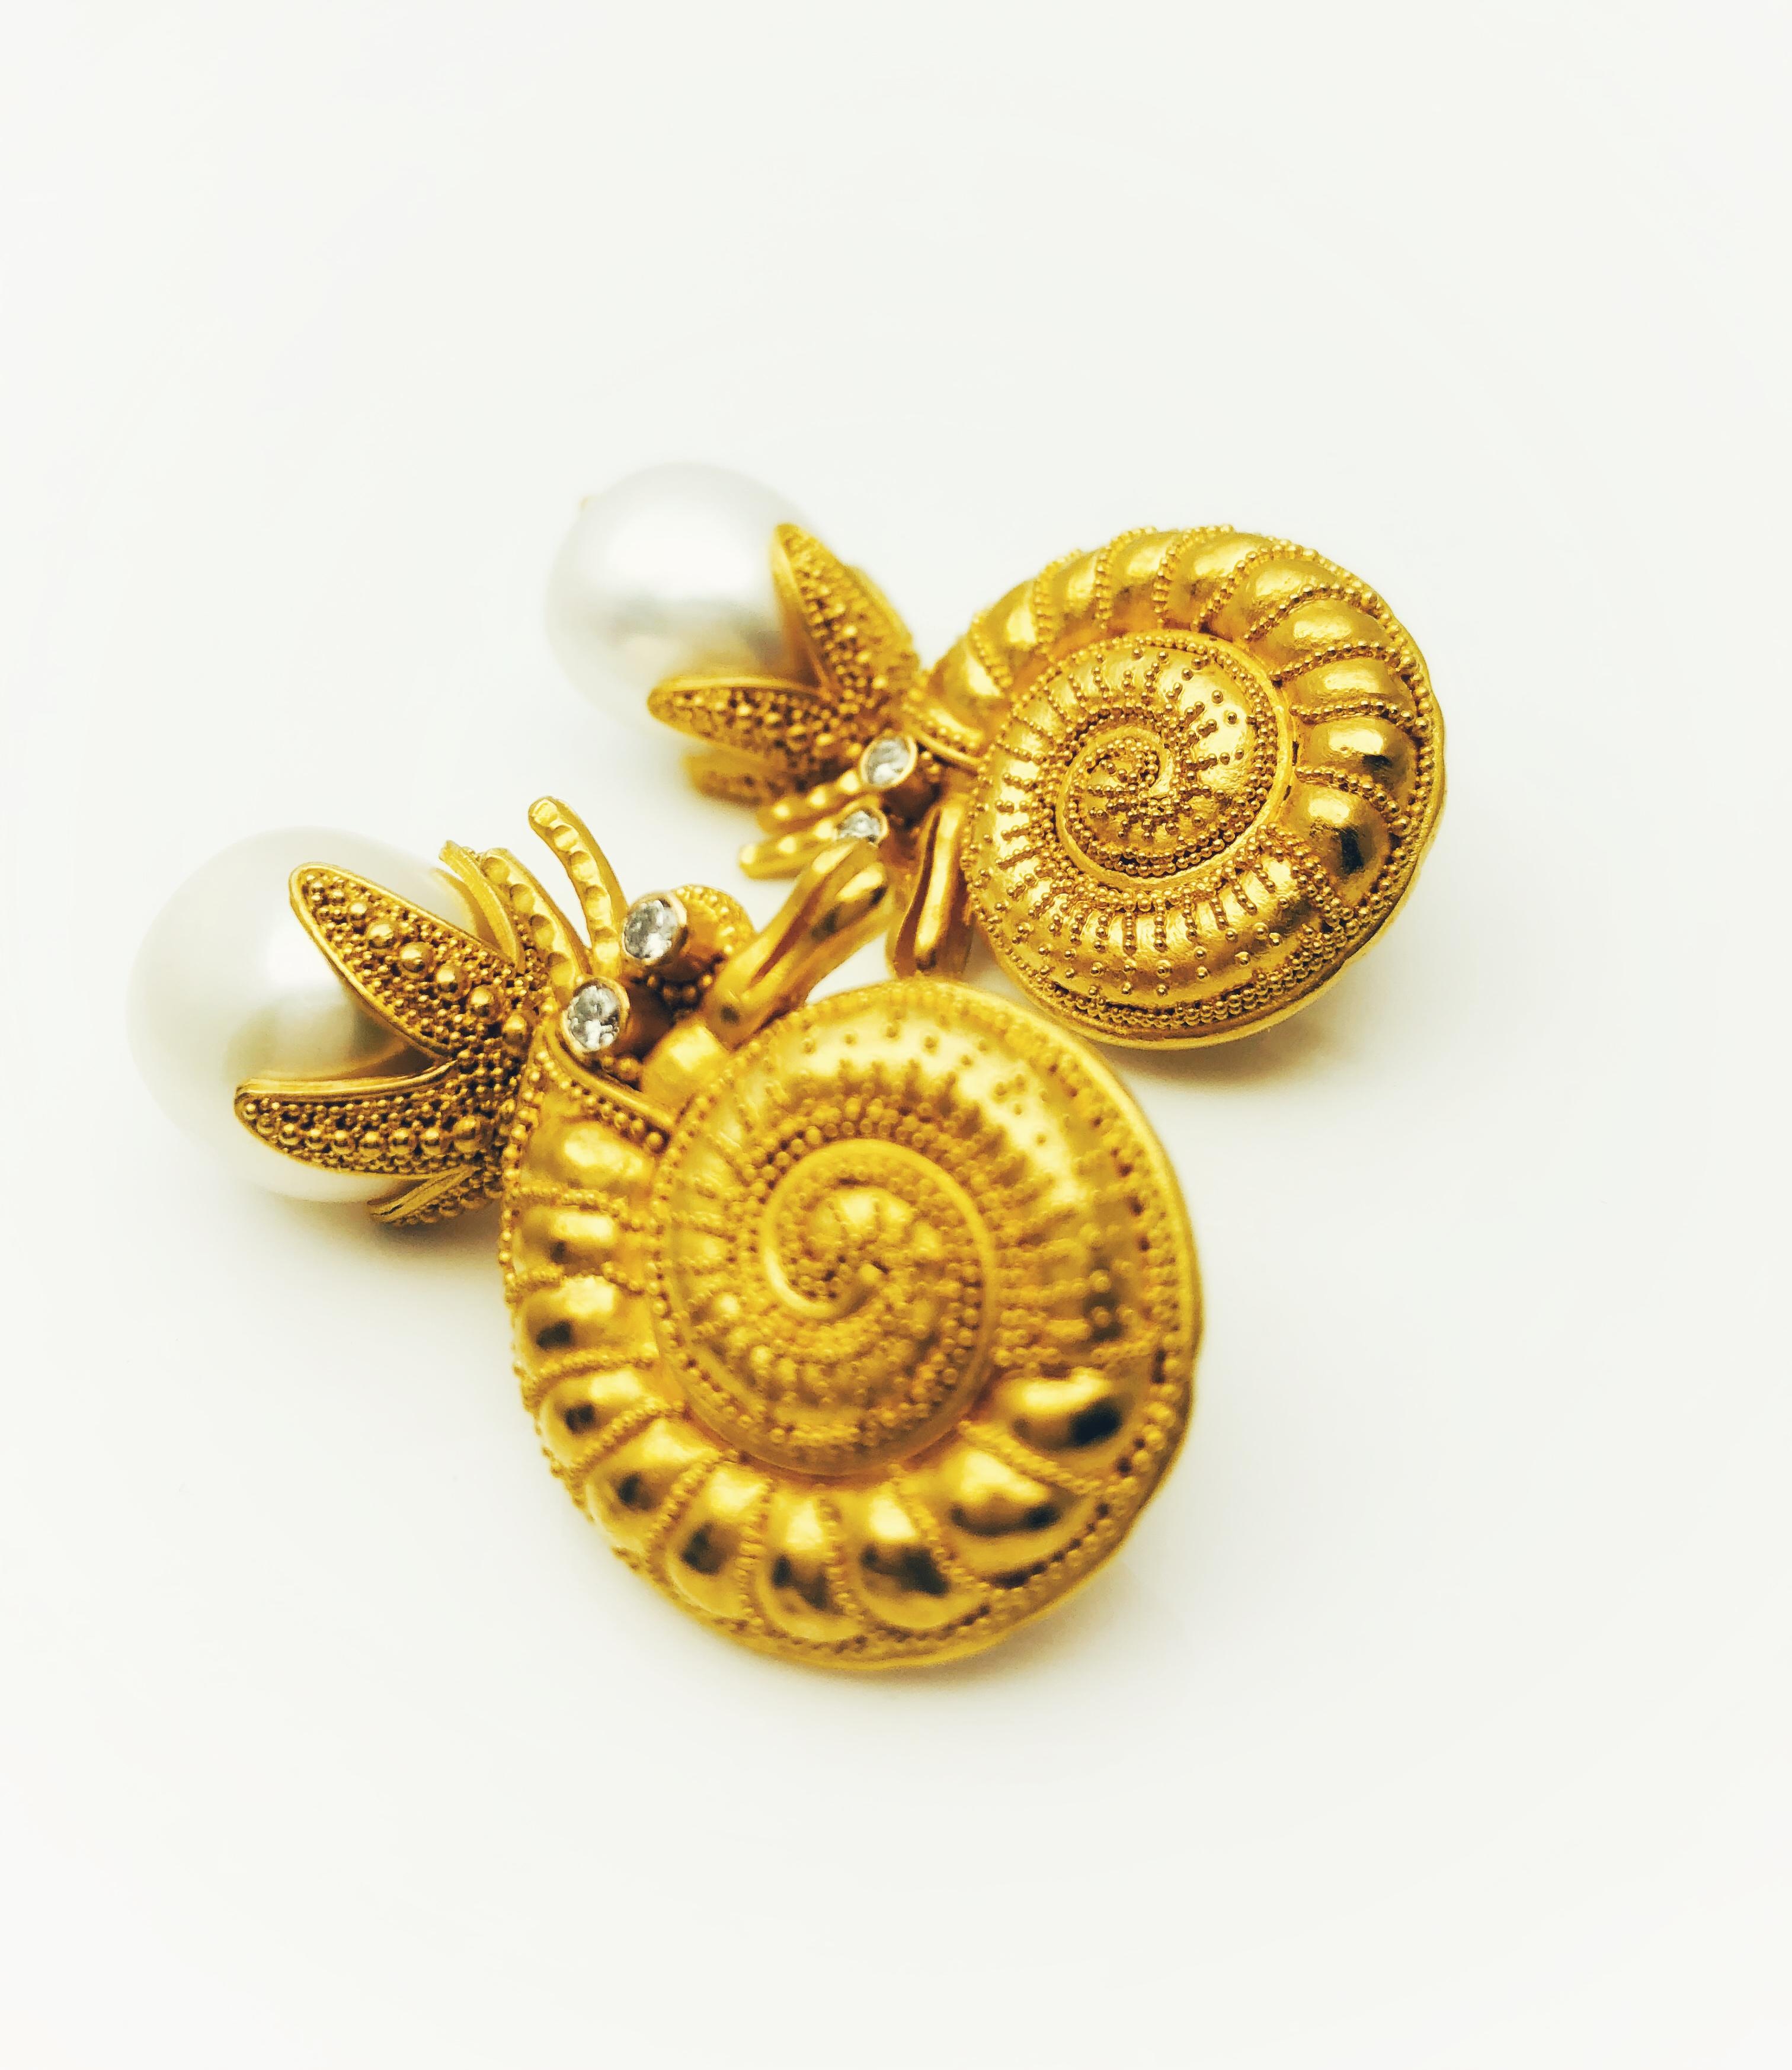 This is an absolutely stunning and so unique pair of earrings! These are by designer Carolyn Tyler. So many details on this set! The craftsmanship and detail is remarkable! These hermit crabs are made in 22 k yellow gold. They have 2 round brilliant